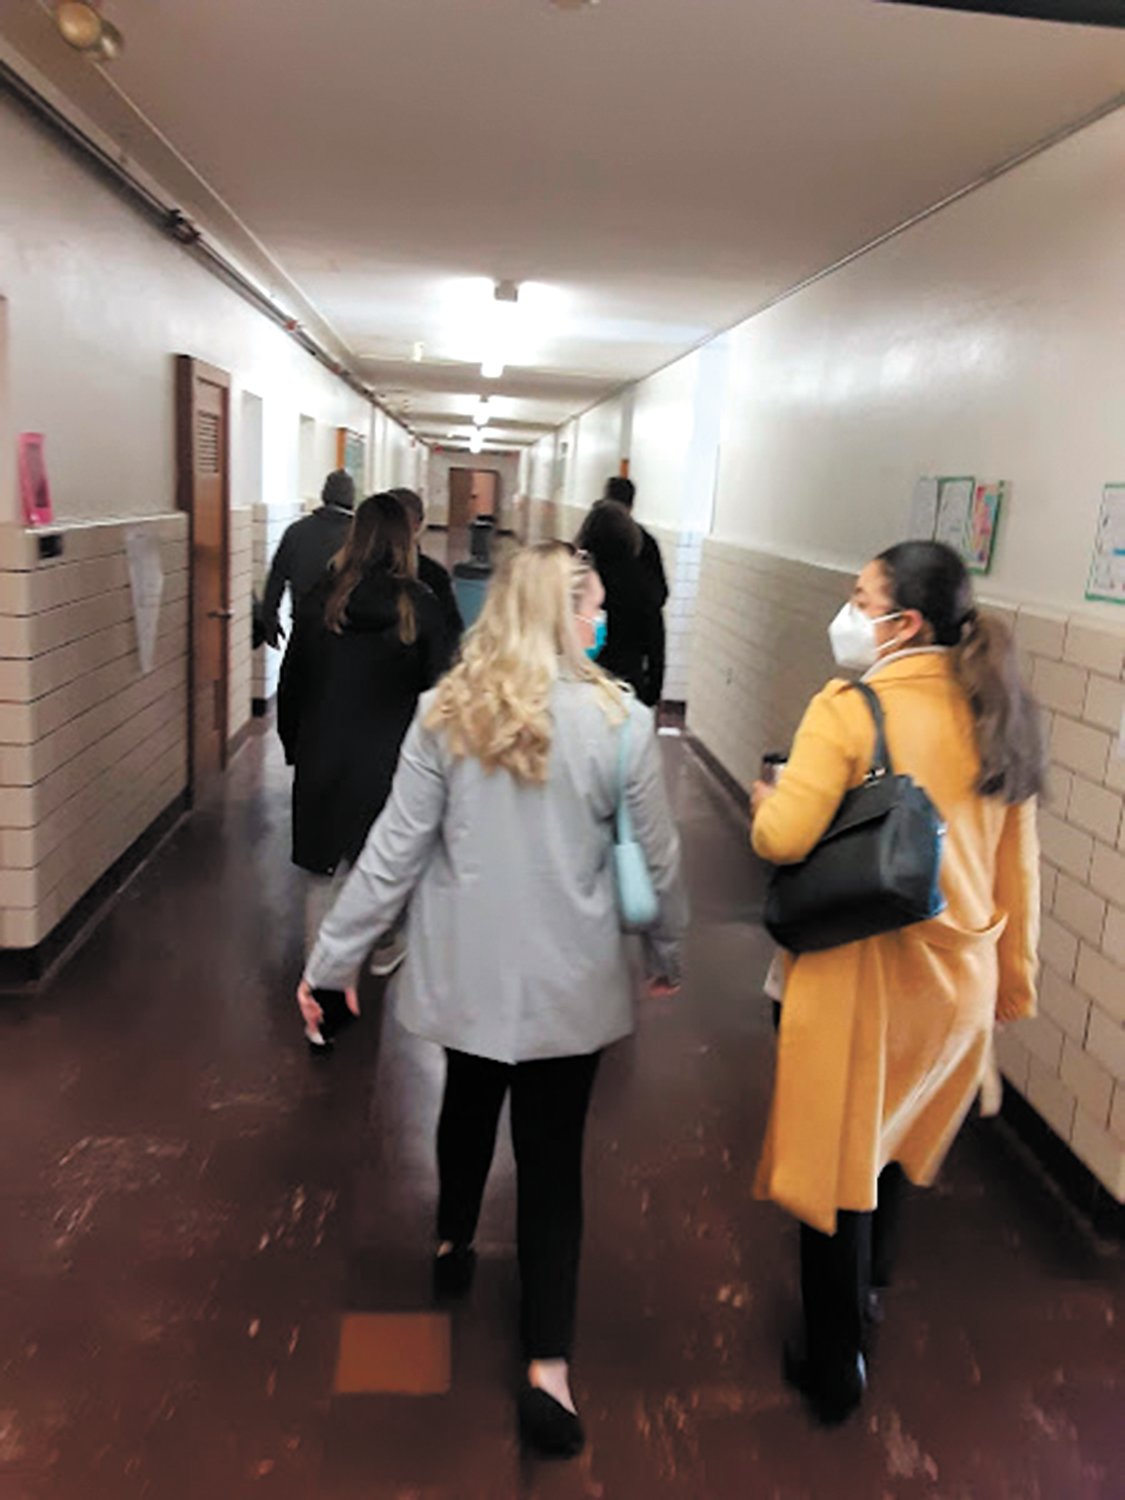 LONG HALLWAYS: The tour of Gladstone School emphasized the traditional method of design which included small classrooms with minimal availability of plugs for technology, and long, empty hallways that have no educational use.